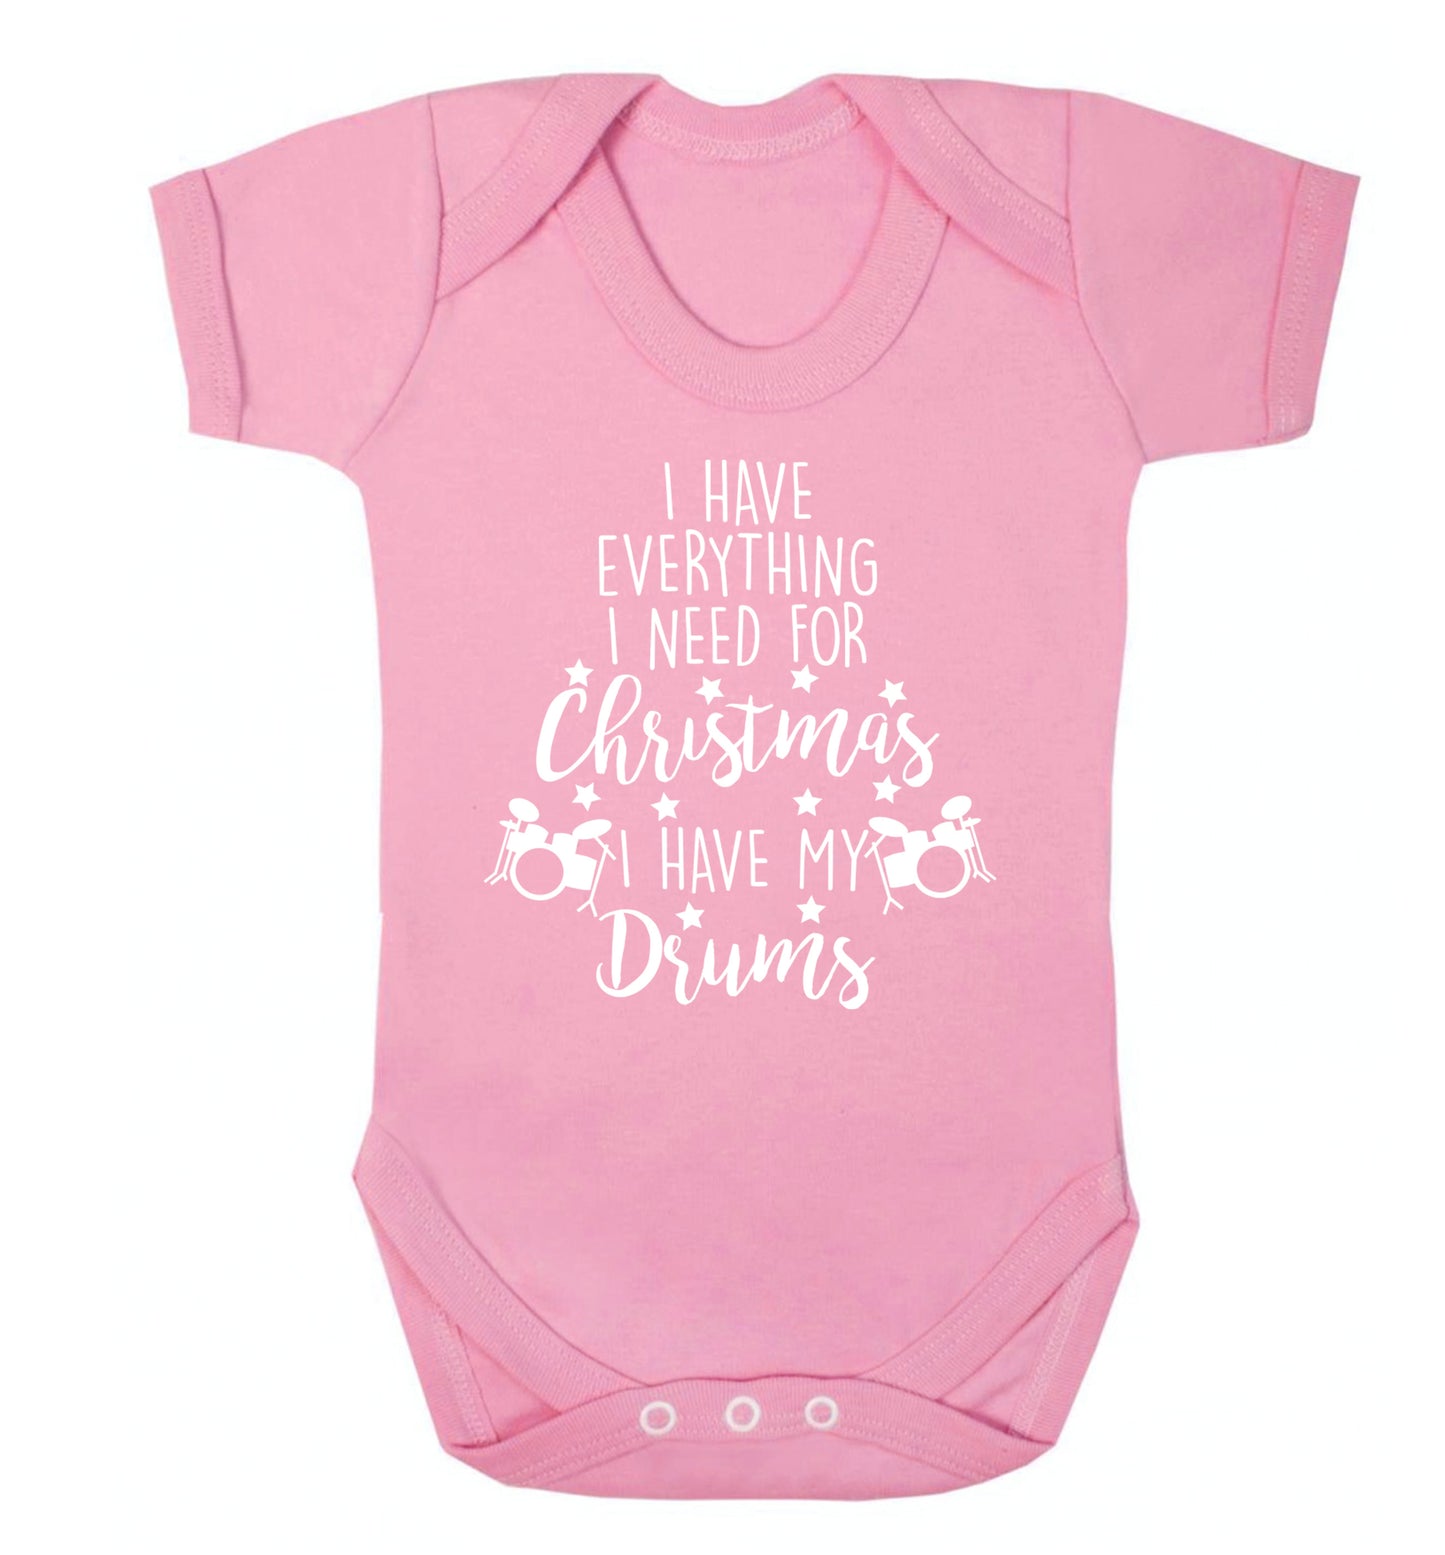 I have everything I need for Christmas I have my drums! Baby Vest pale pink 18-24 months